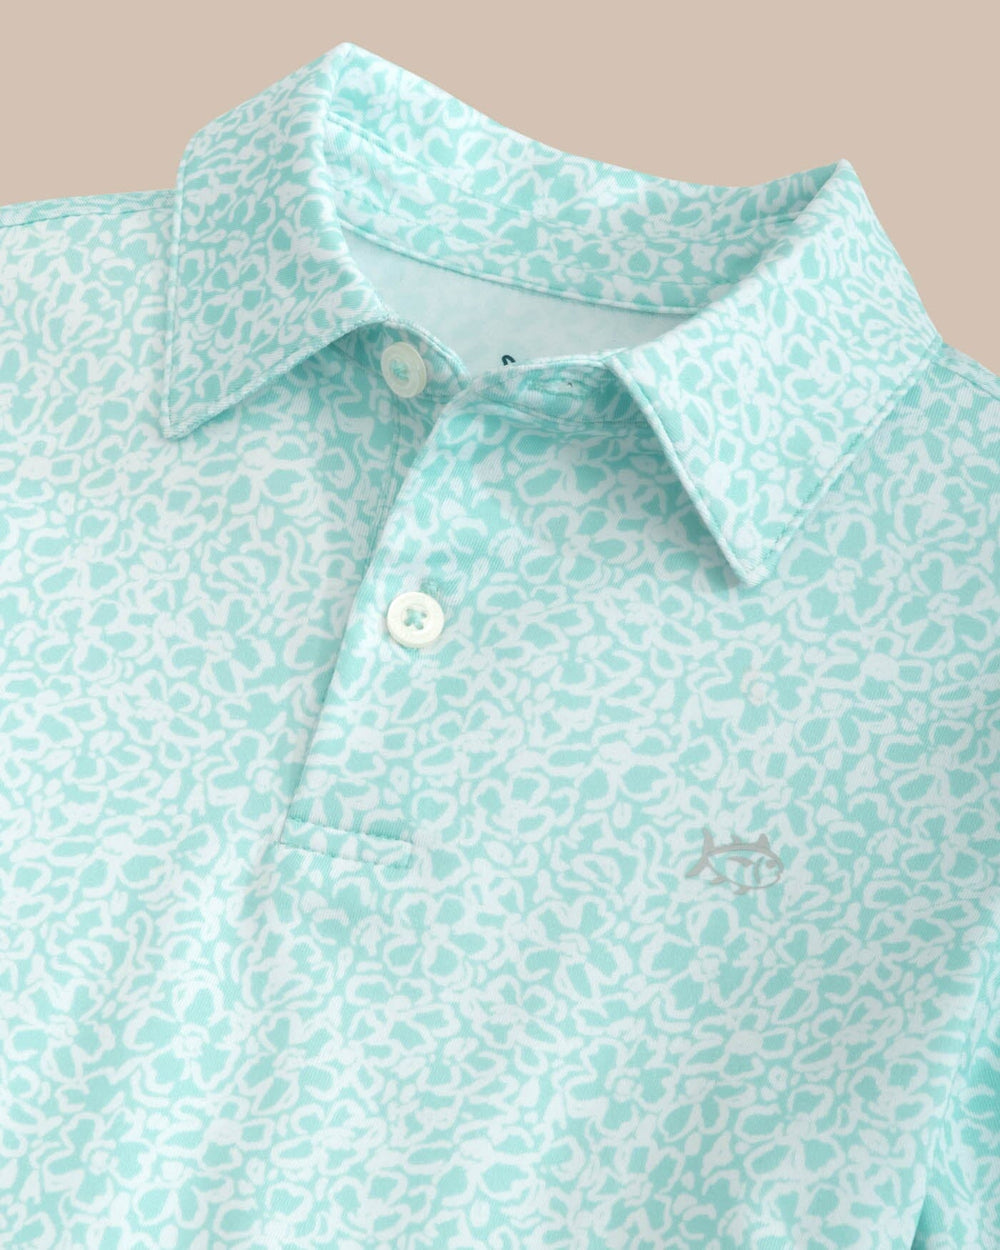 The detail view of the Southern Tide Kids Driver That Floral Feeling Printed Polo by Southern Tide - Wake Blue